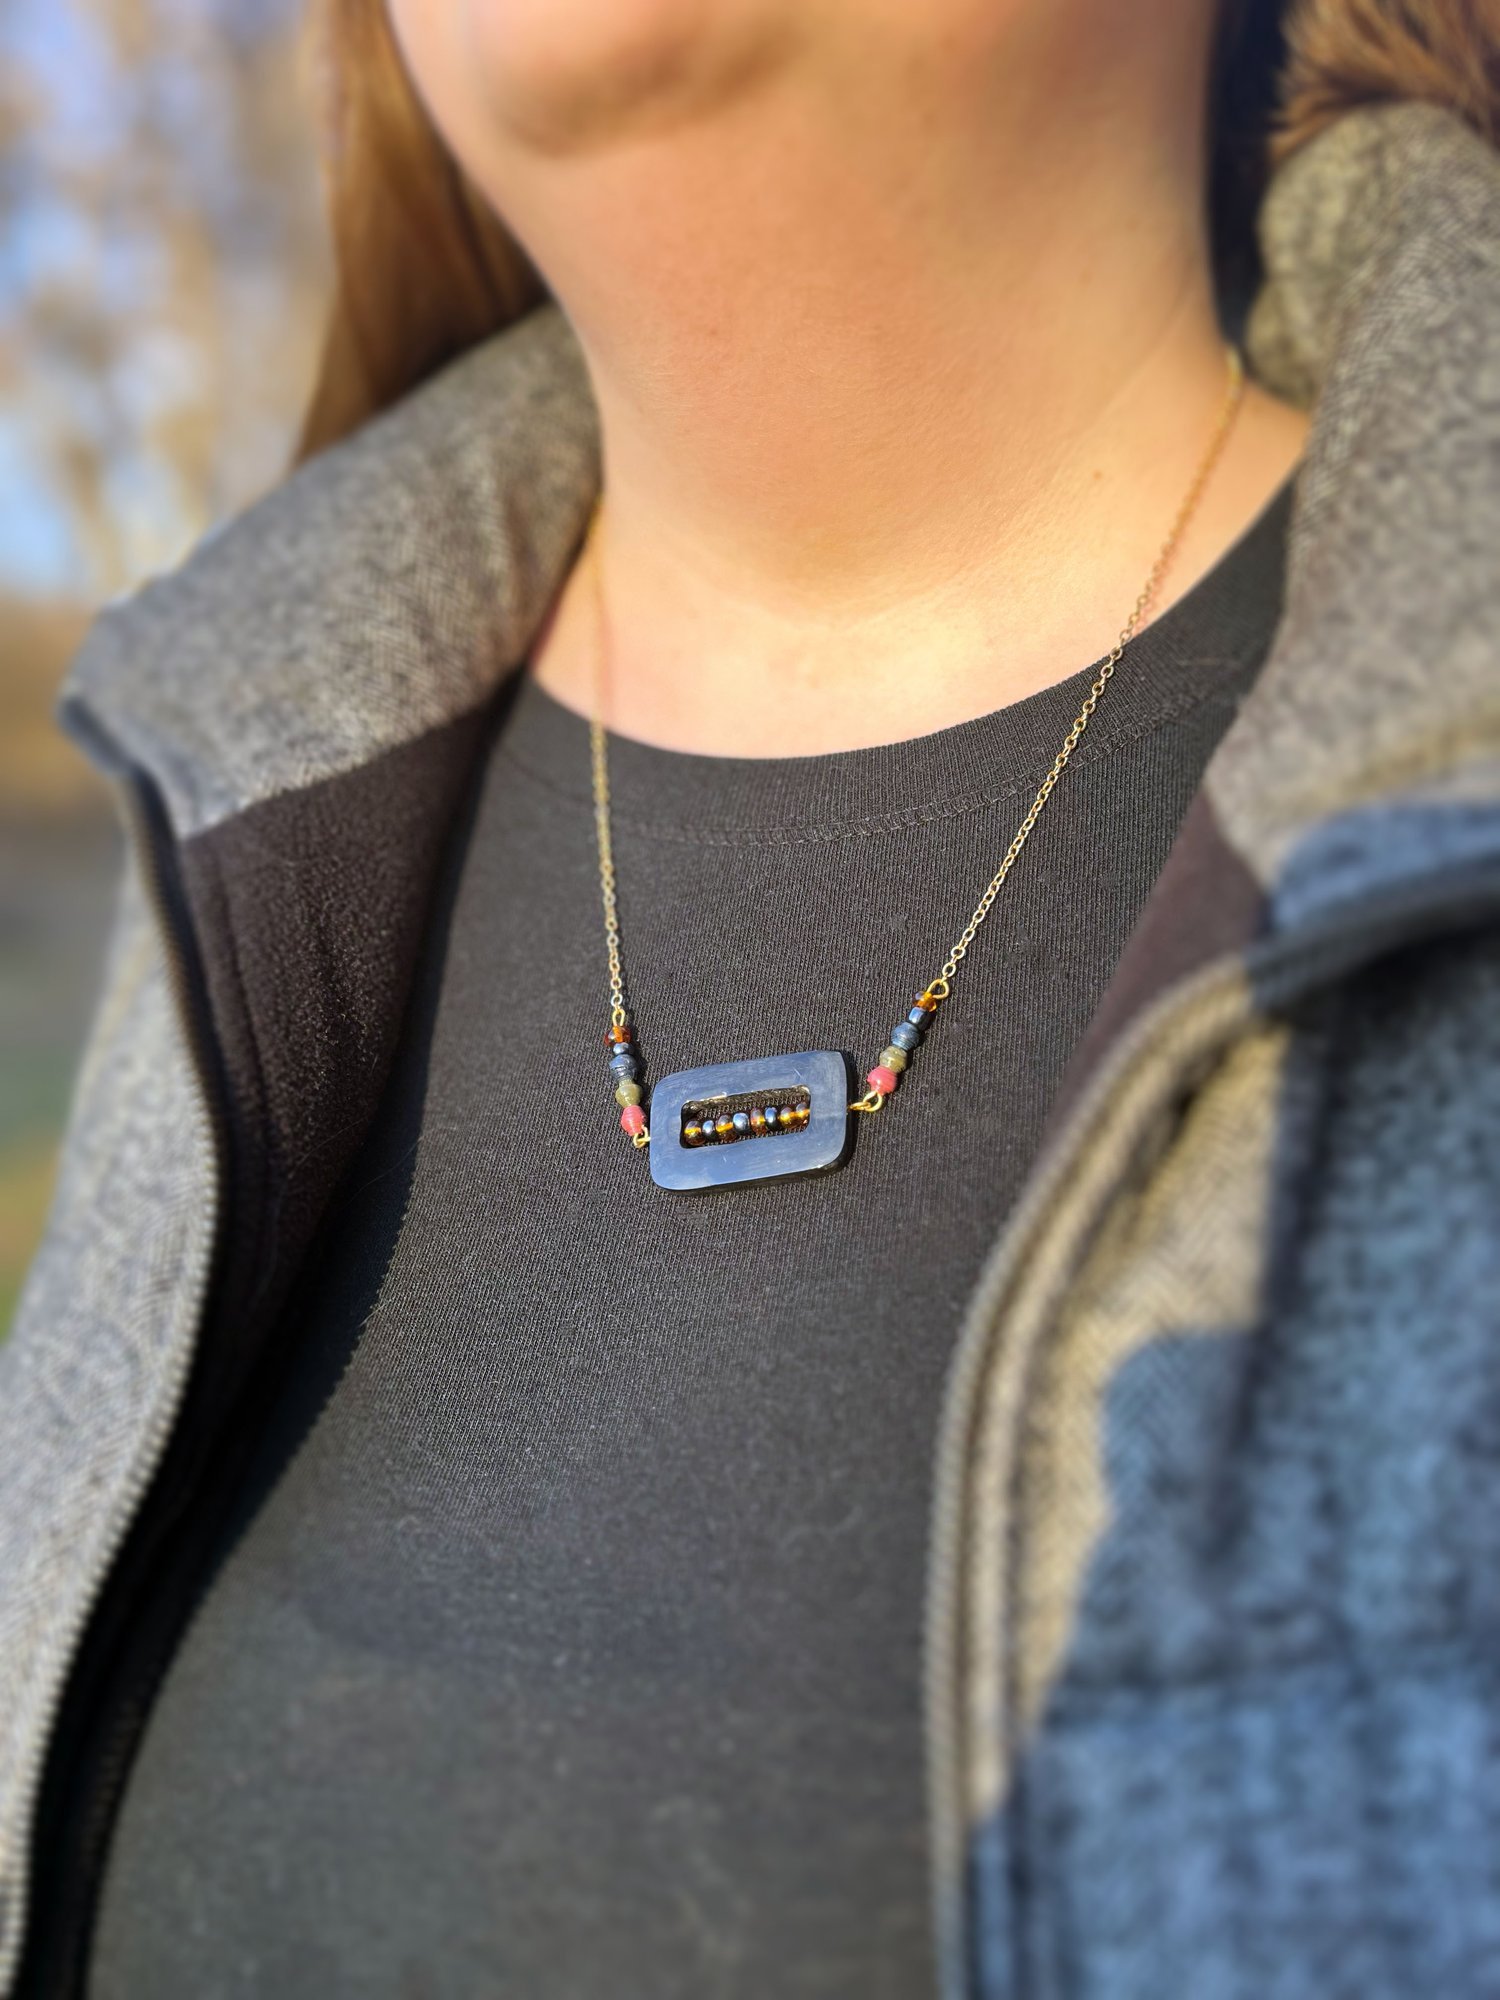 This necklace is a colorful versatile piece made in Rwanda by DuHope. DuHope is equipping women with skills in jewelry-making and soap-making in order to help them earn a living. Support this cause by buying this necklace and more of their product th